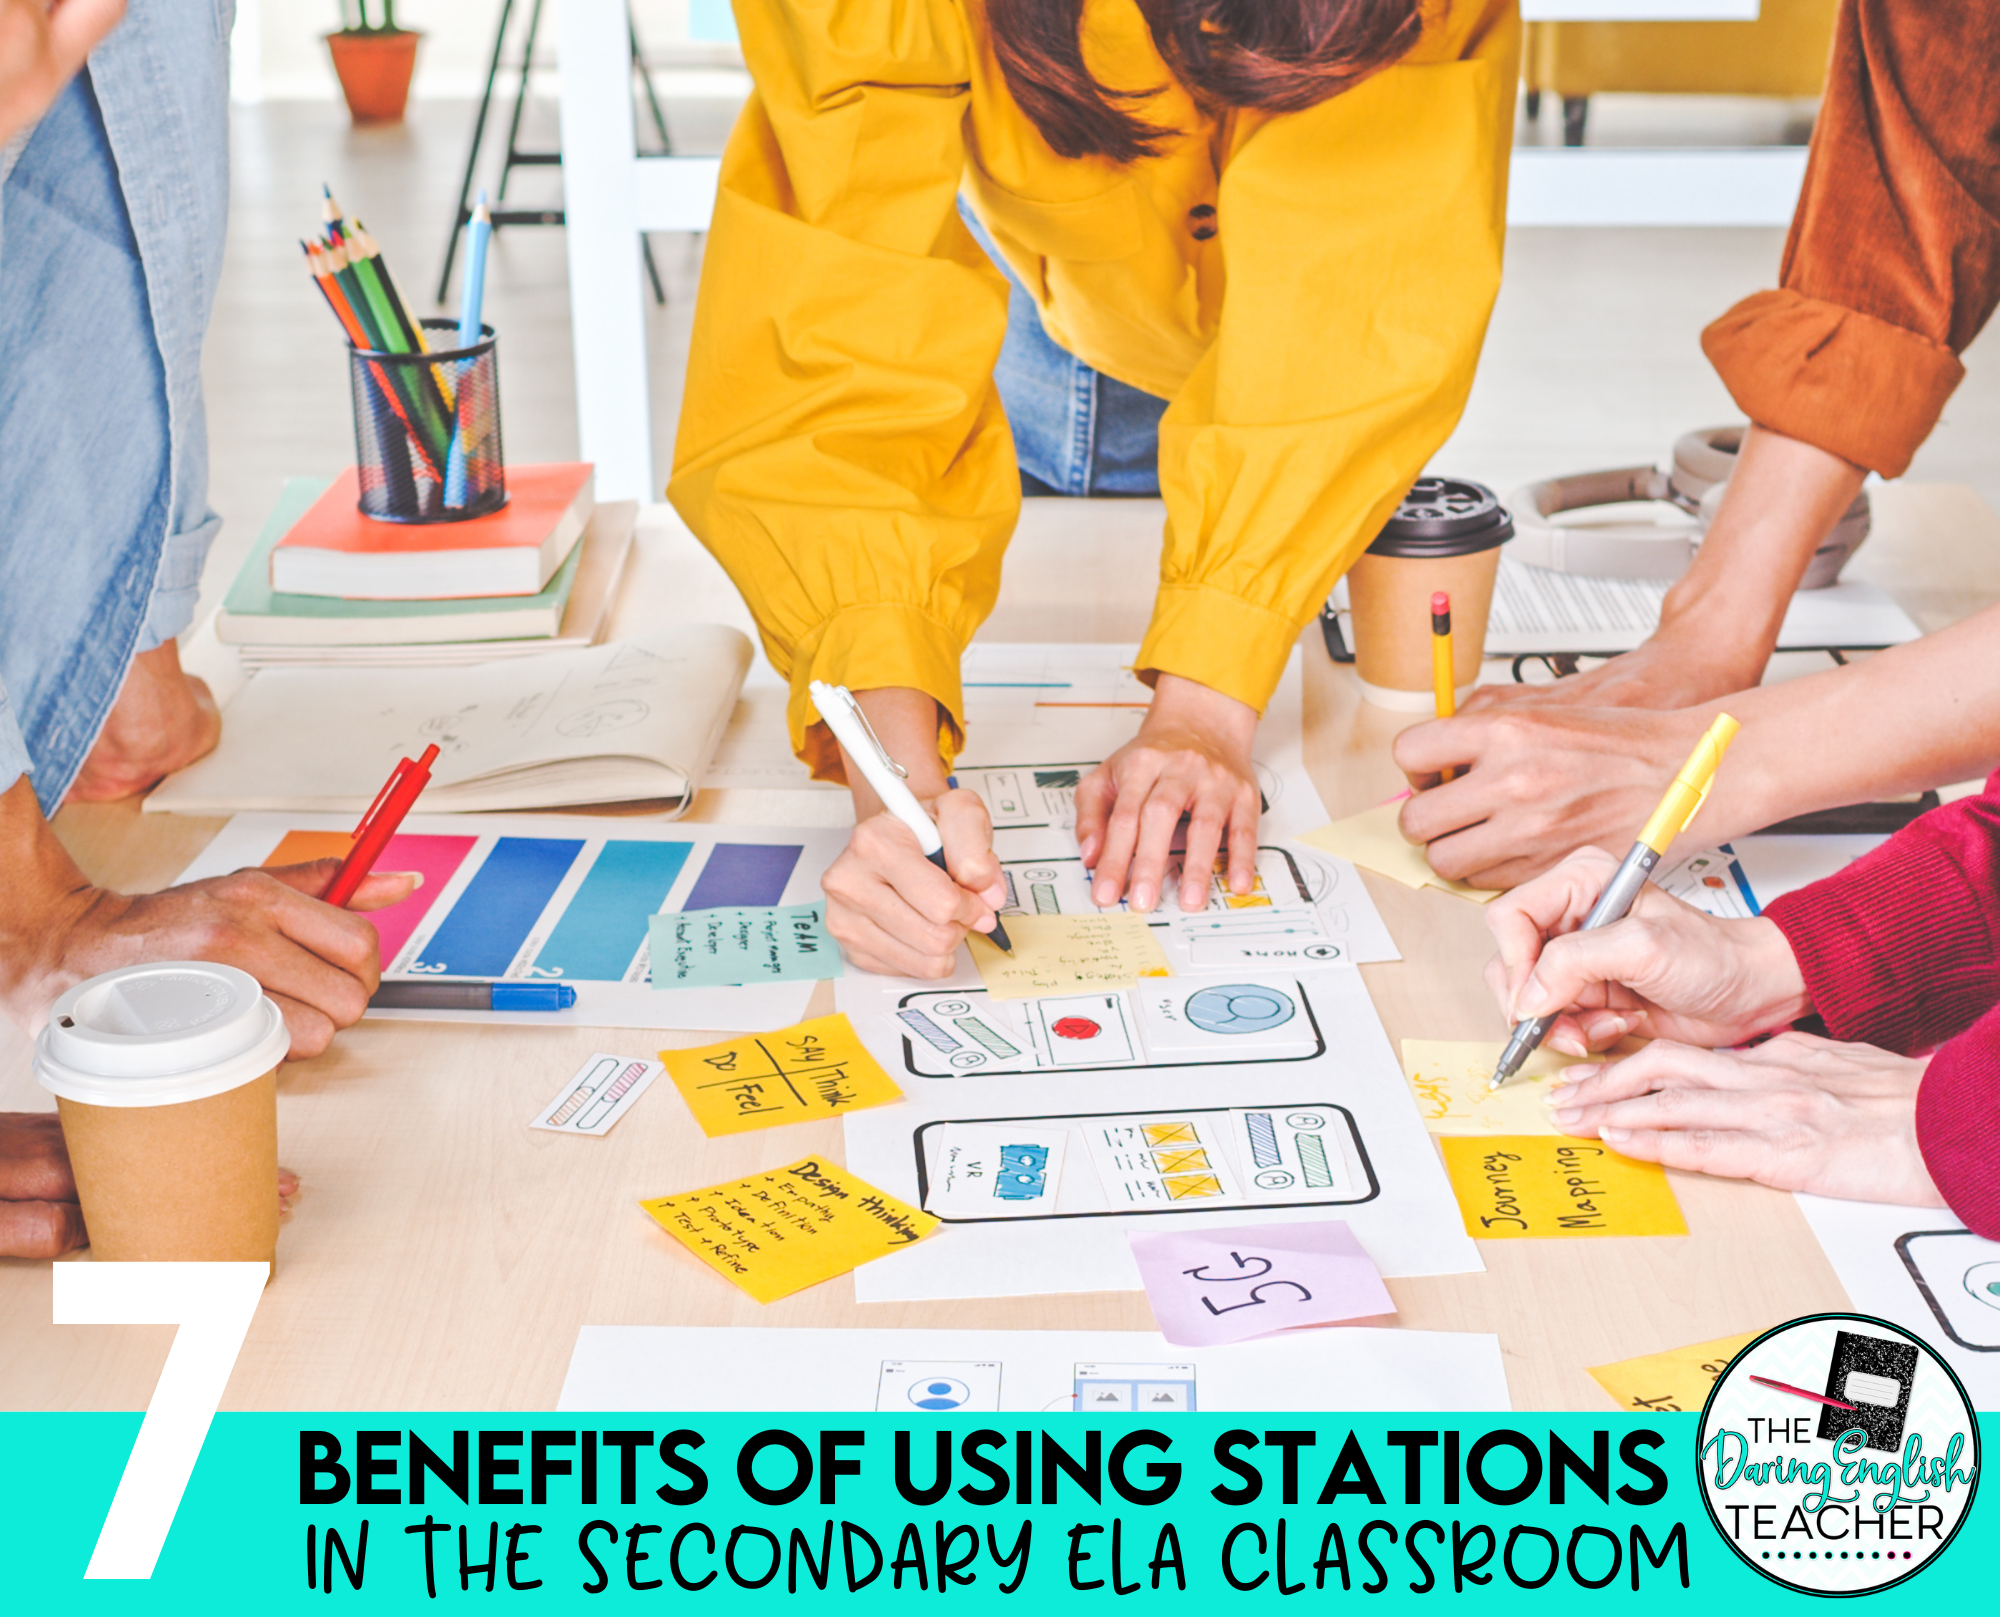 7 Benefits of Stations in the Secondary ELA Classroom